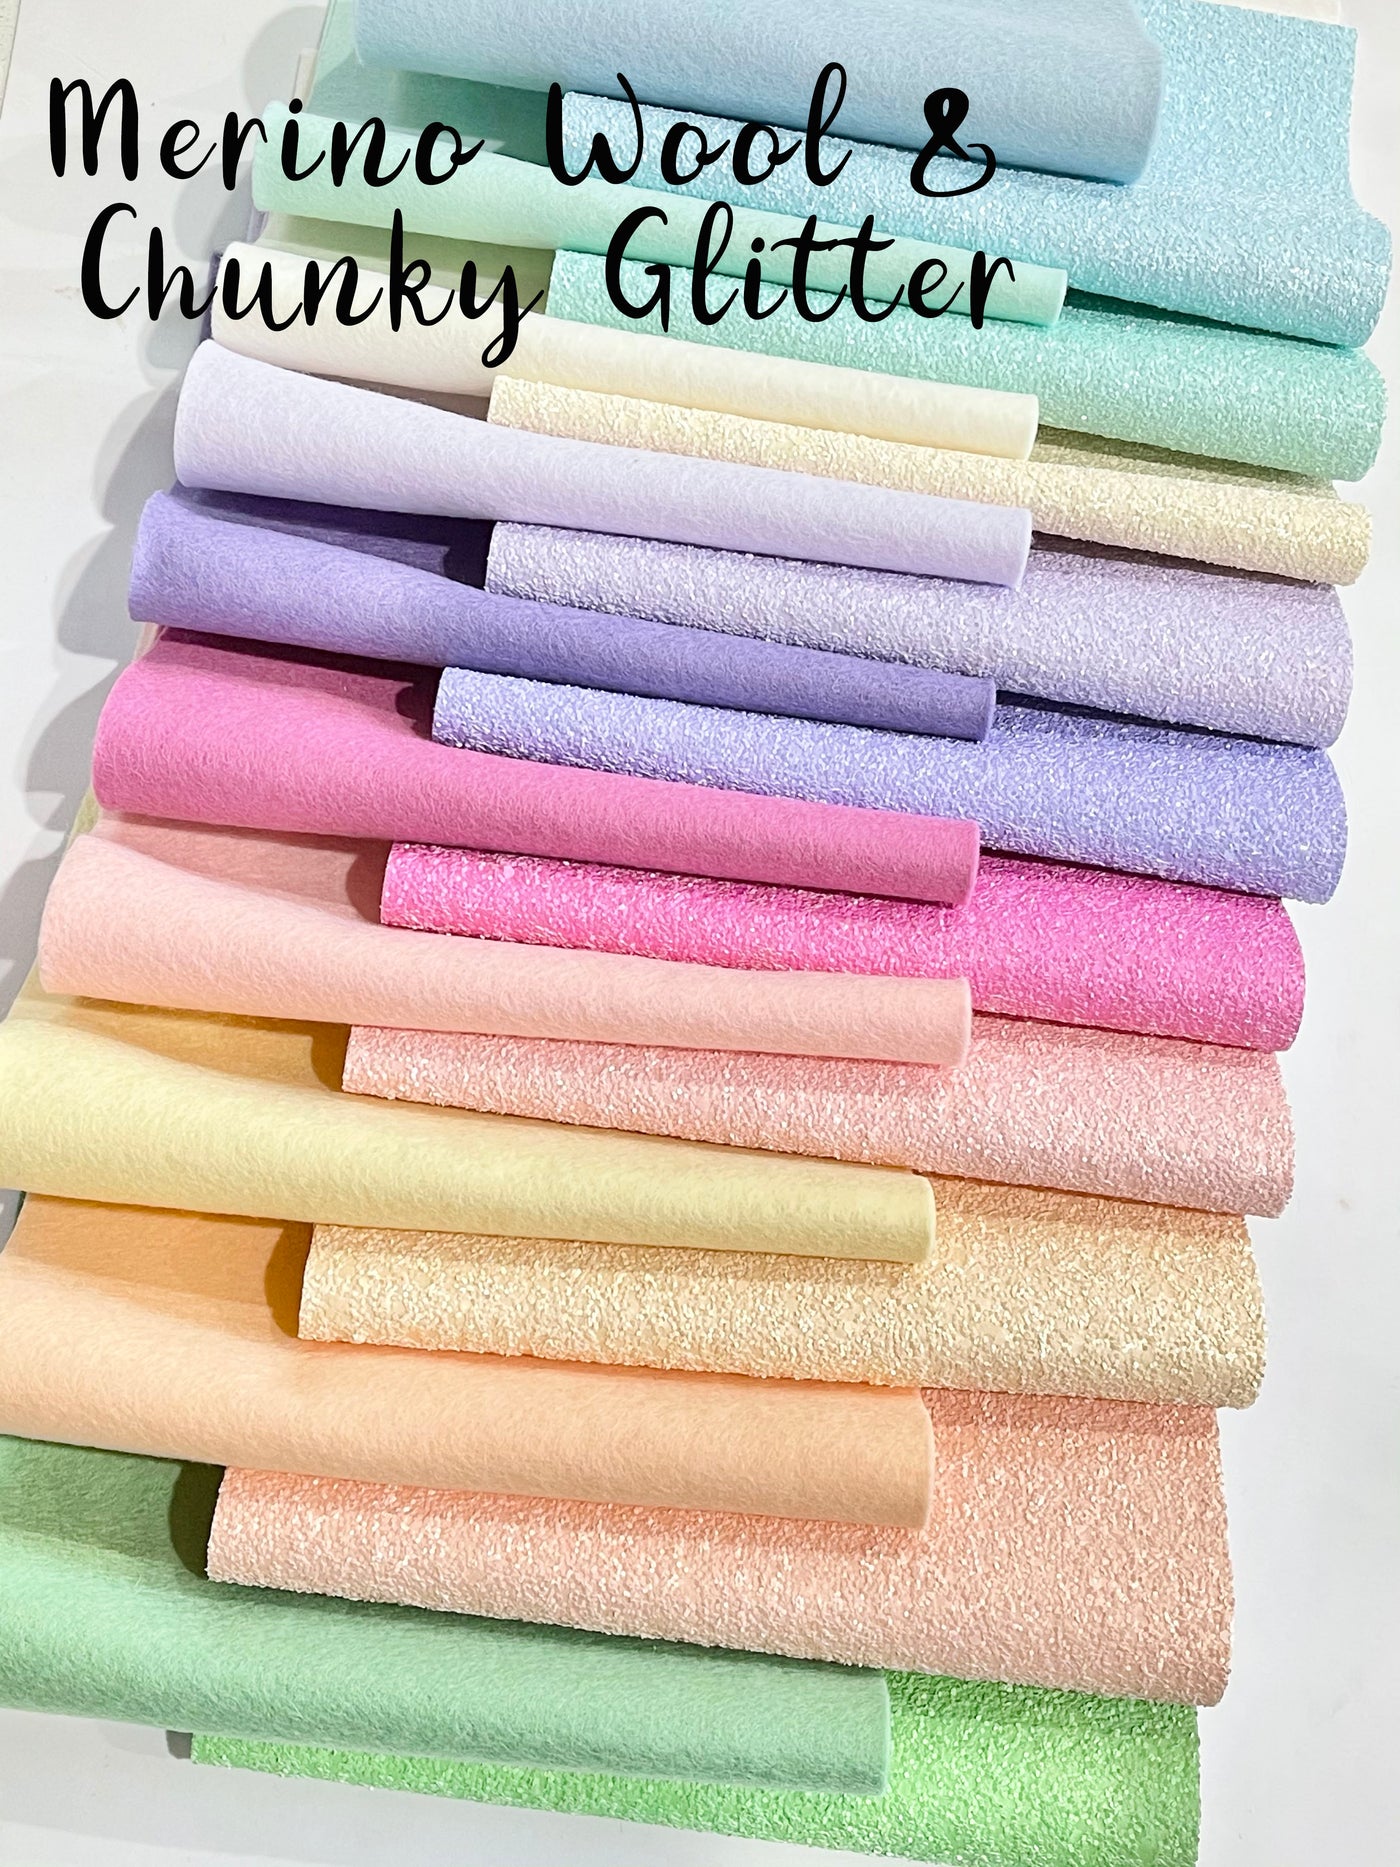 Bundle of 20 Chunky Glitter and Wool Felt  Bundle ~Choice of 10 or 20 Sheets